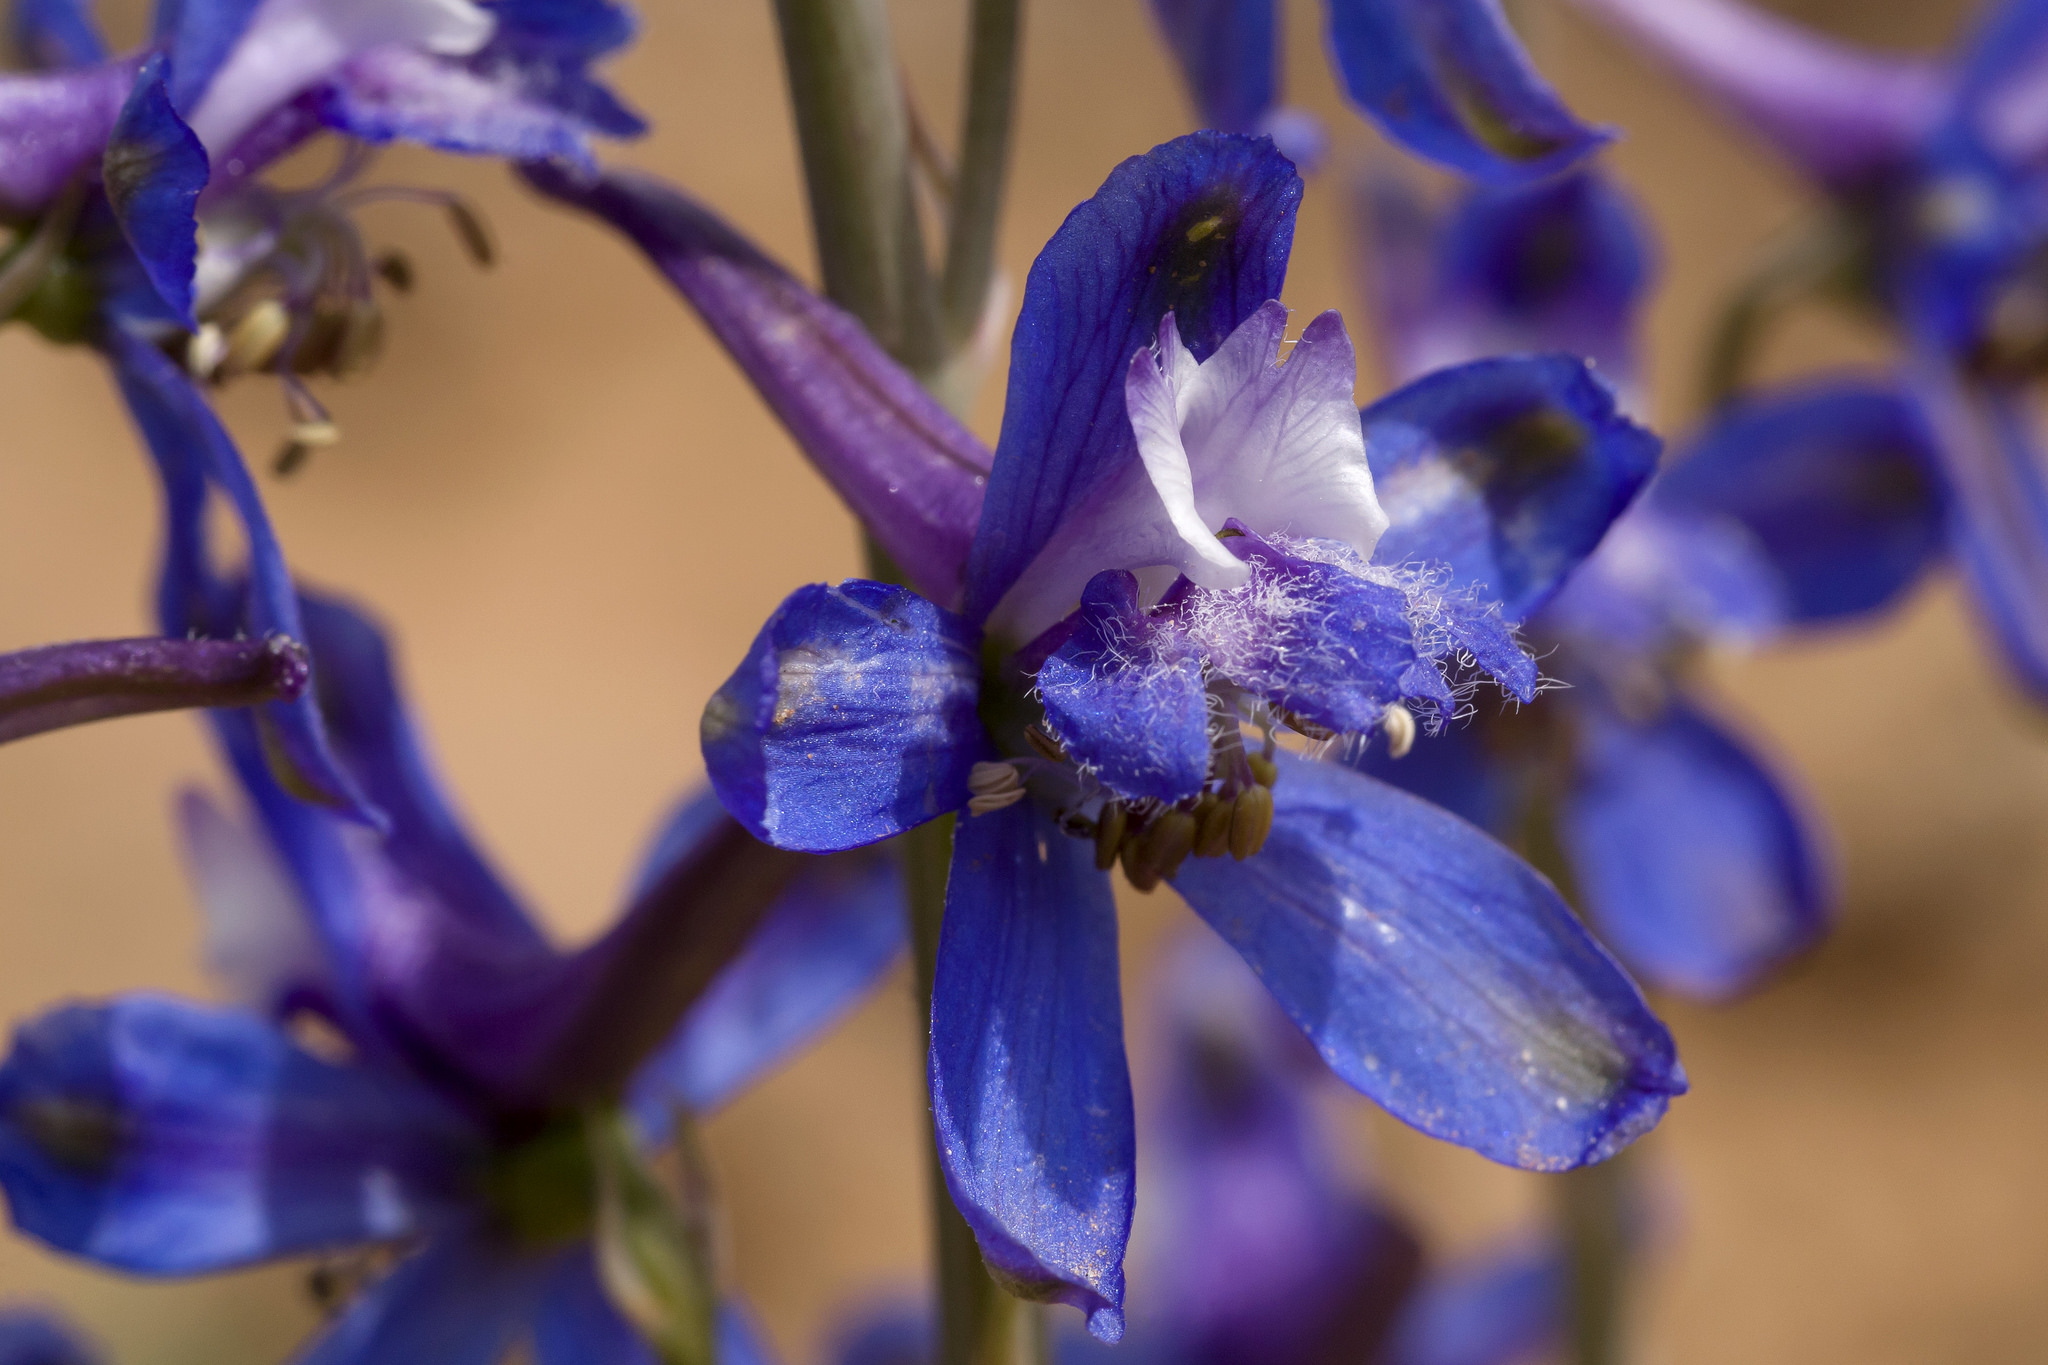 Close-up of Delphinium scaposum showing complex floral parts and fuzz on one of the petals